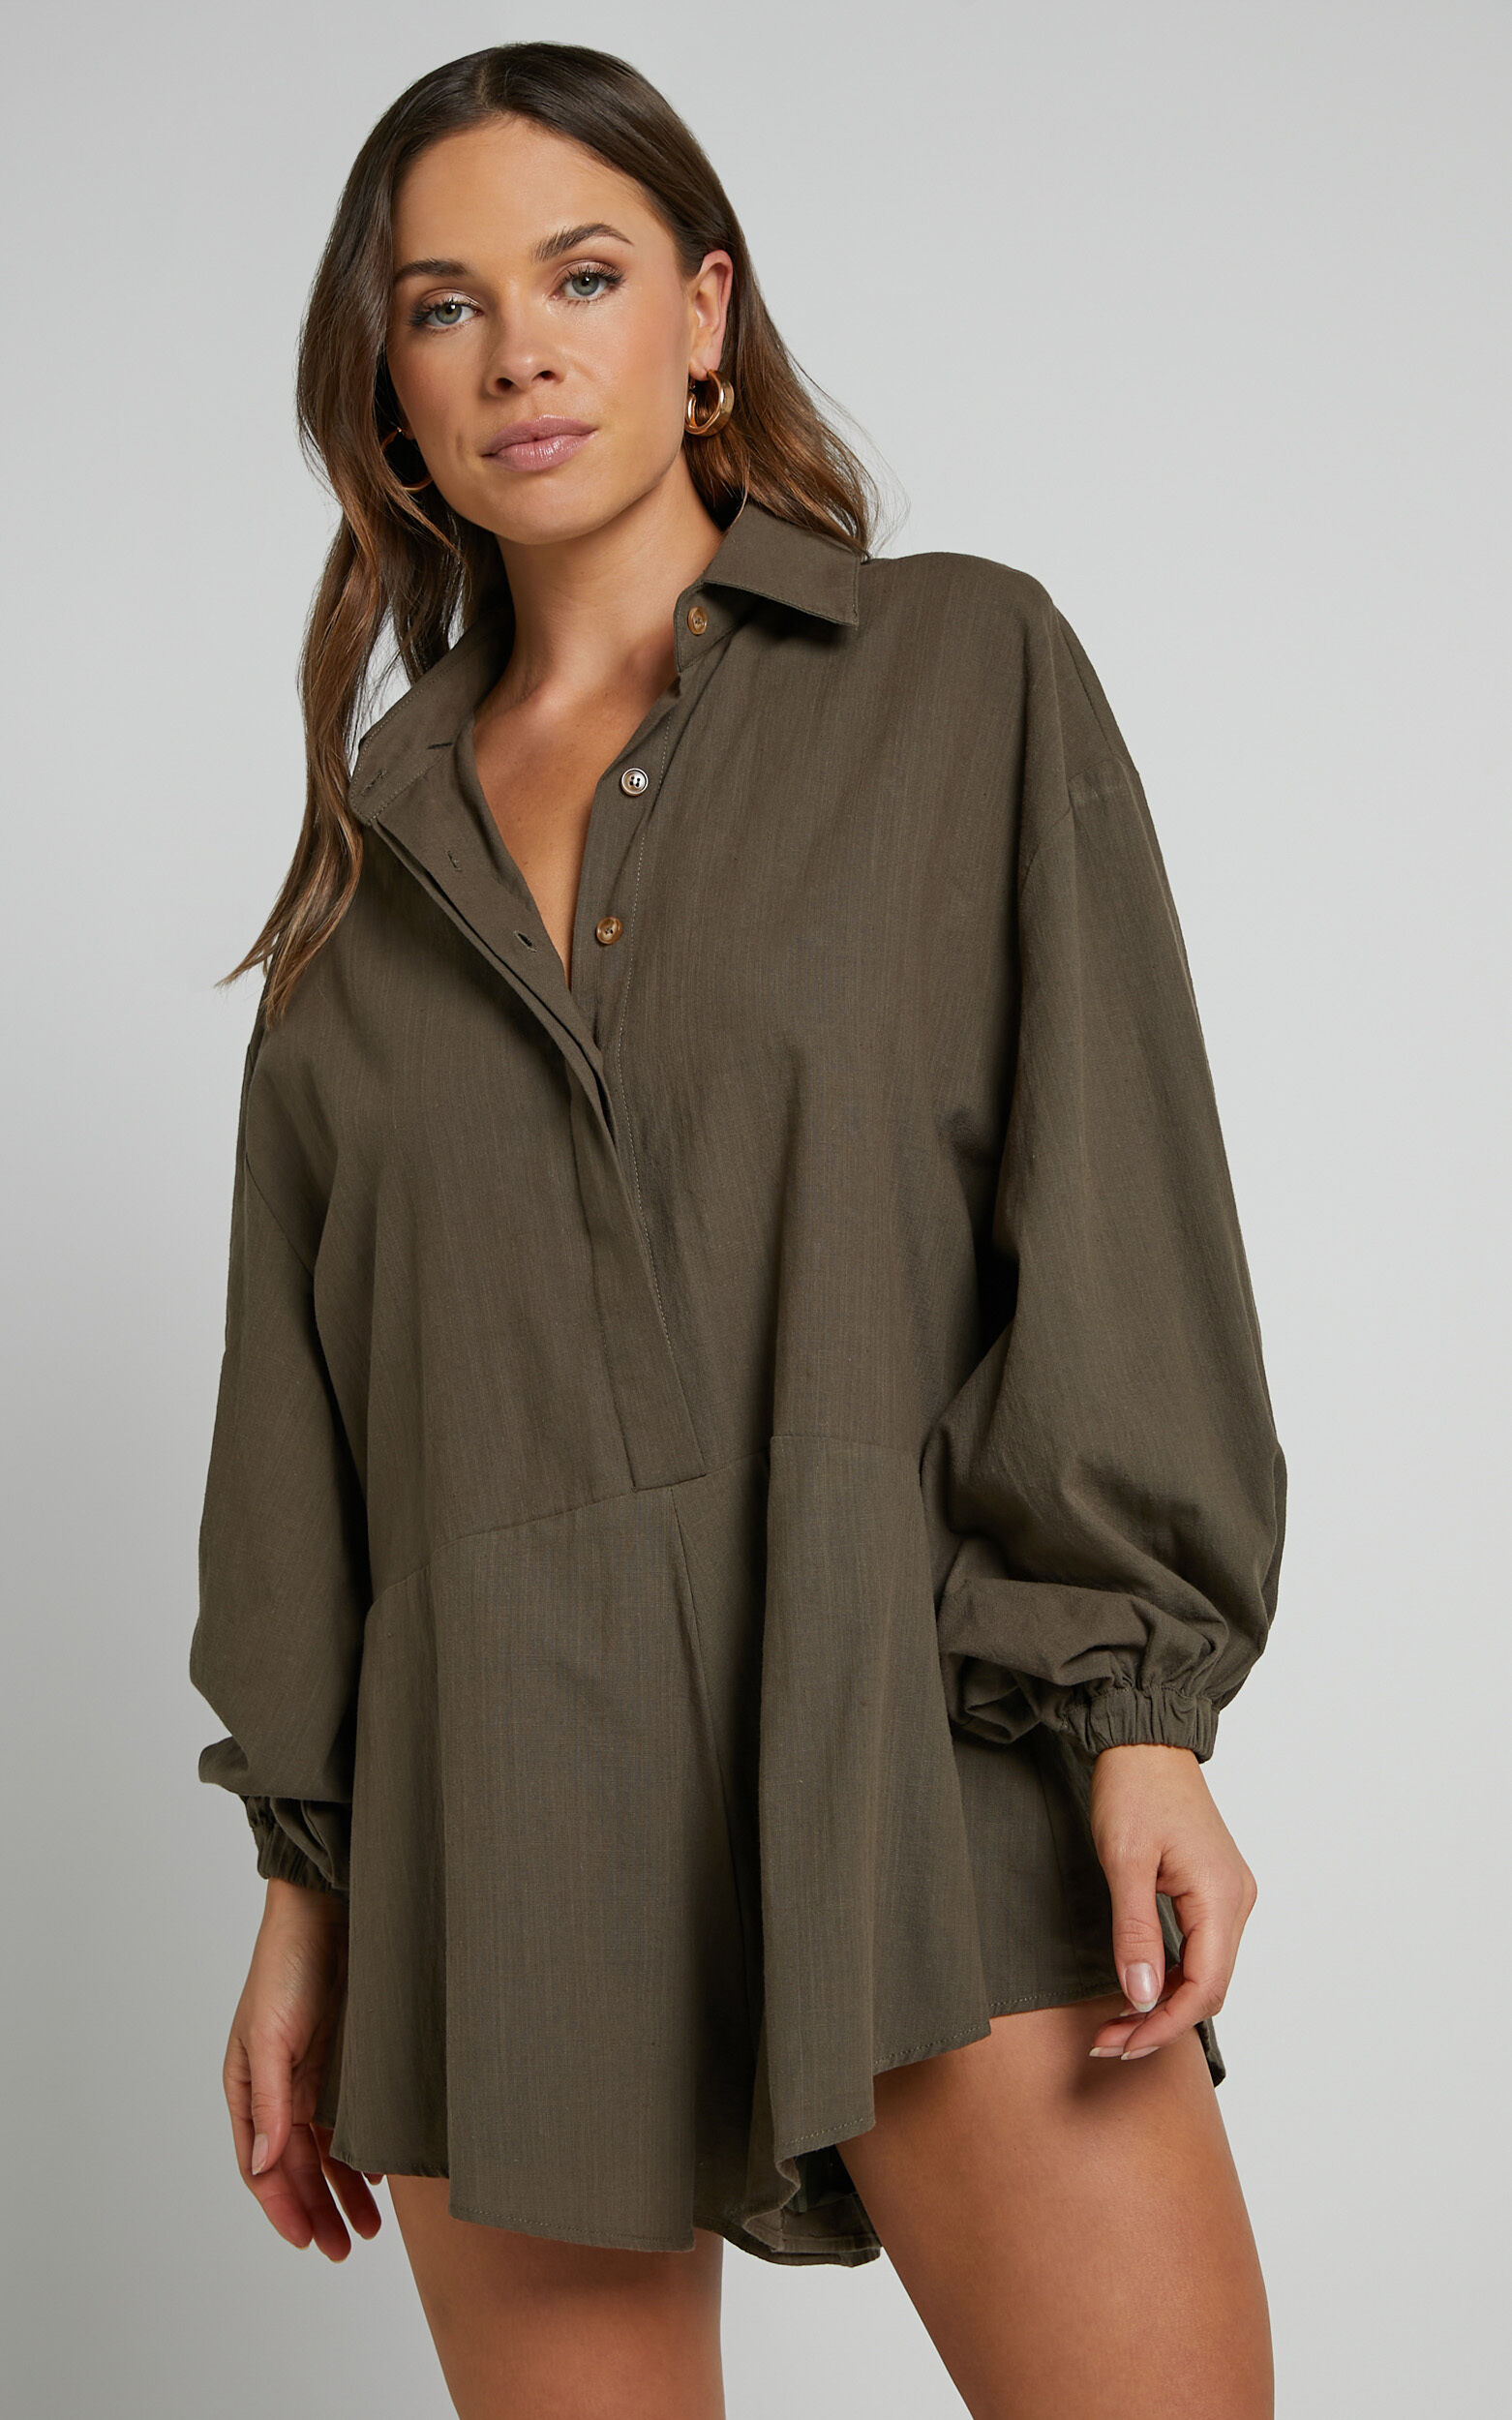 Anka Playsuit - Relaxed Button Front Shirt Playsuit in Khaki - 04, GRN6, super-hi-res image number null